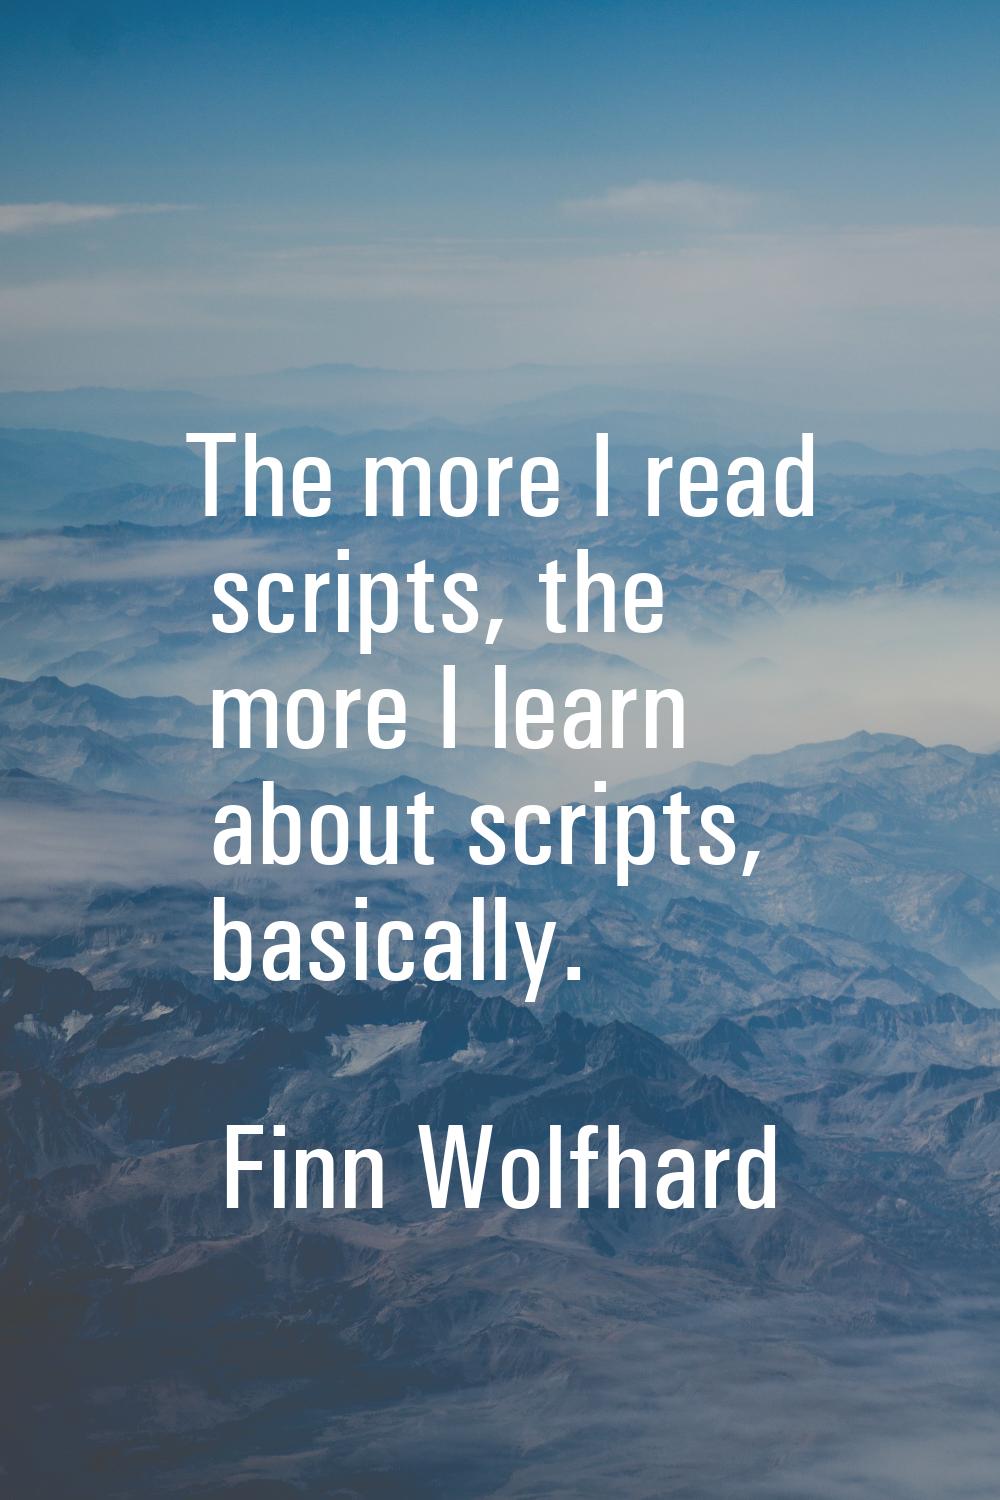 The more I read scripts, the more I learn about scripts, basically.